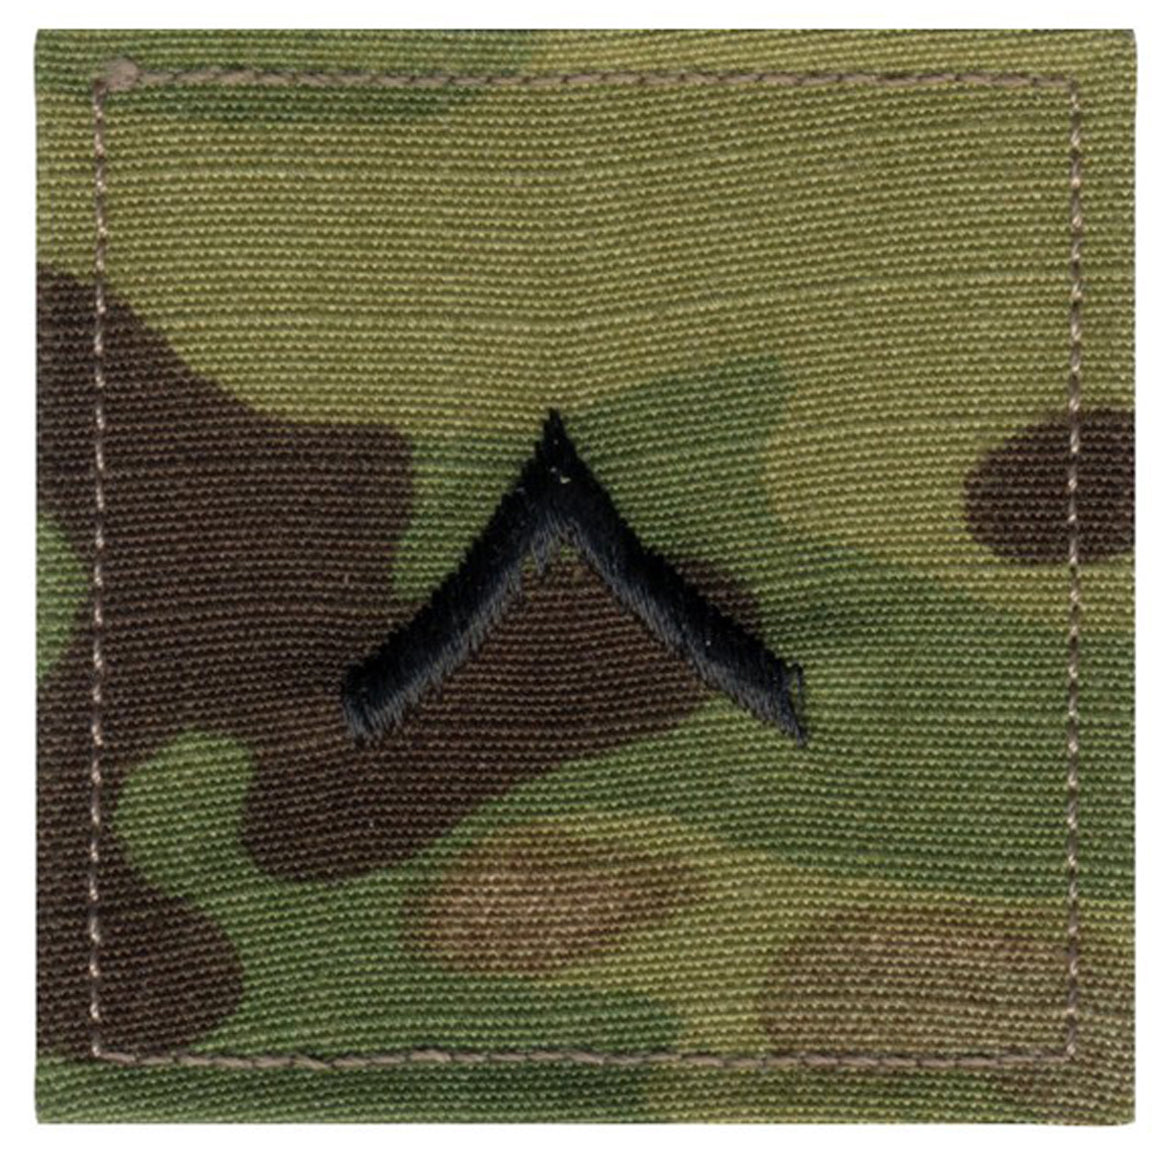 Official U.S. Made Embroidered Rank Insignia - Private